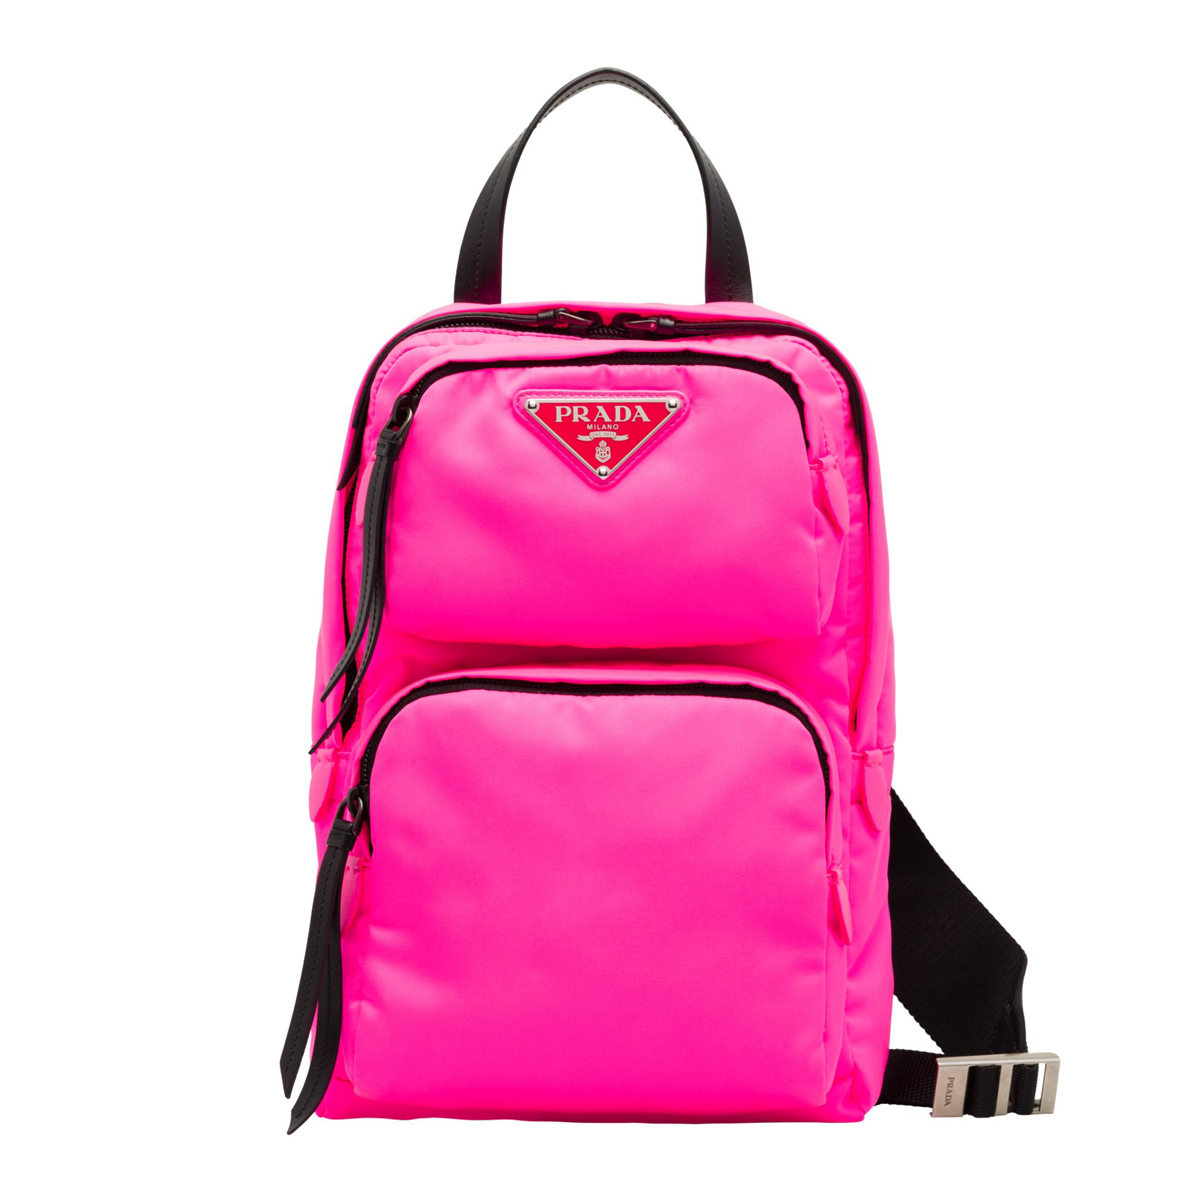 From Prada to Whistles, See the Best Backpacks for Women | Who 